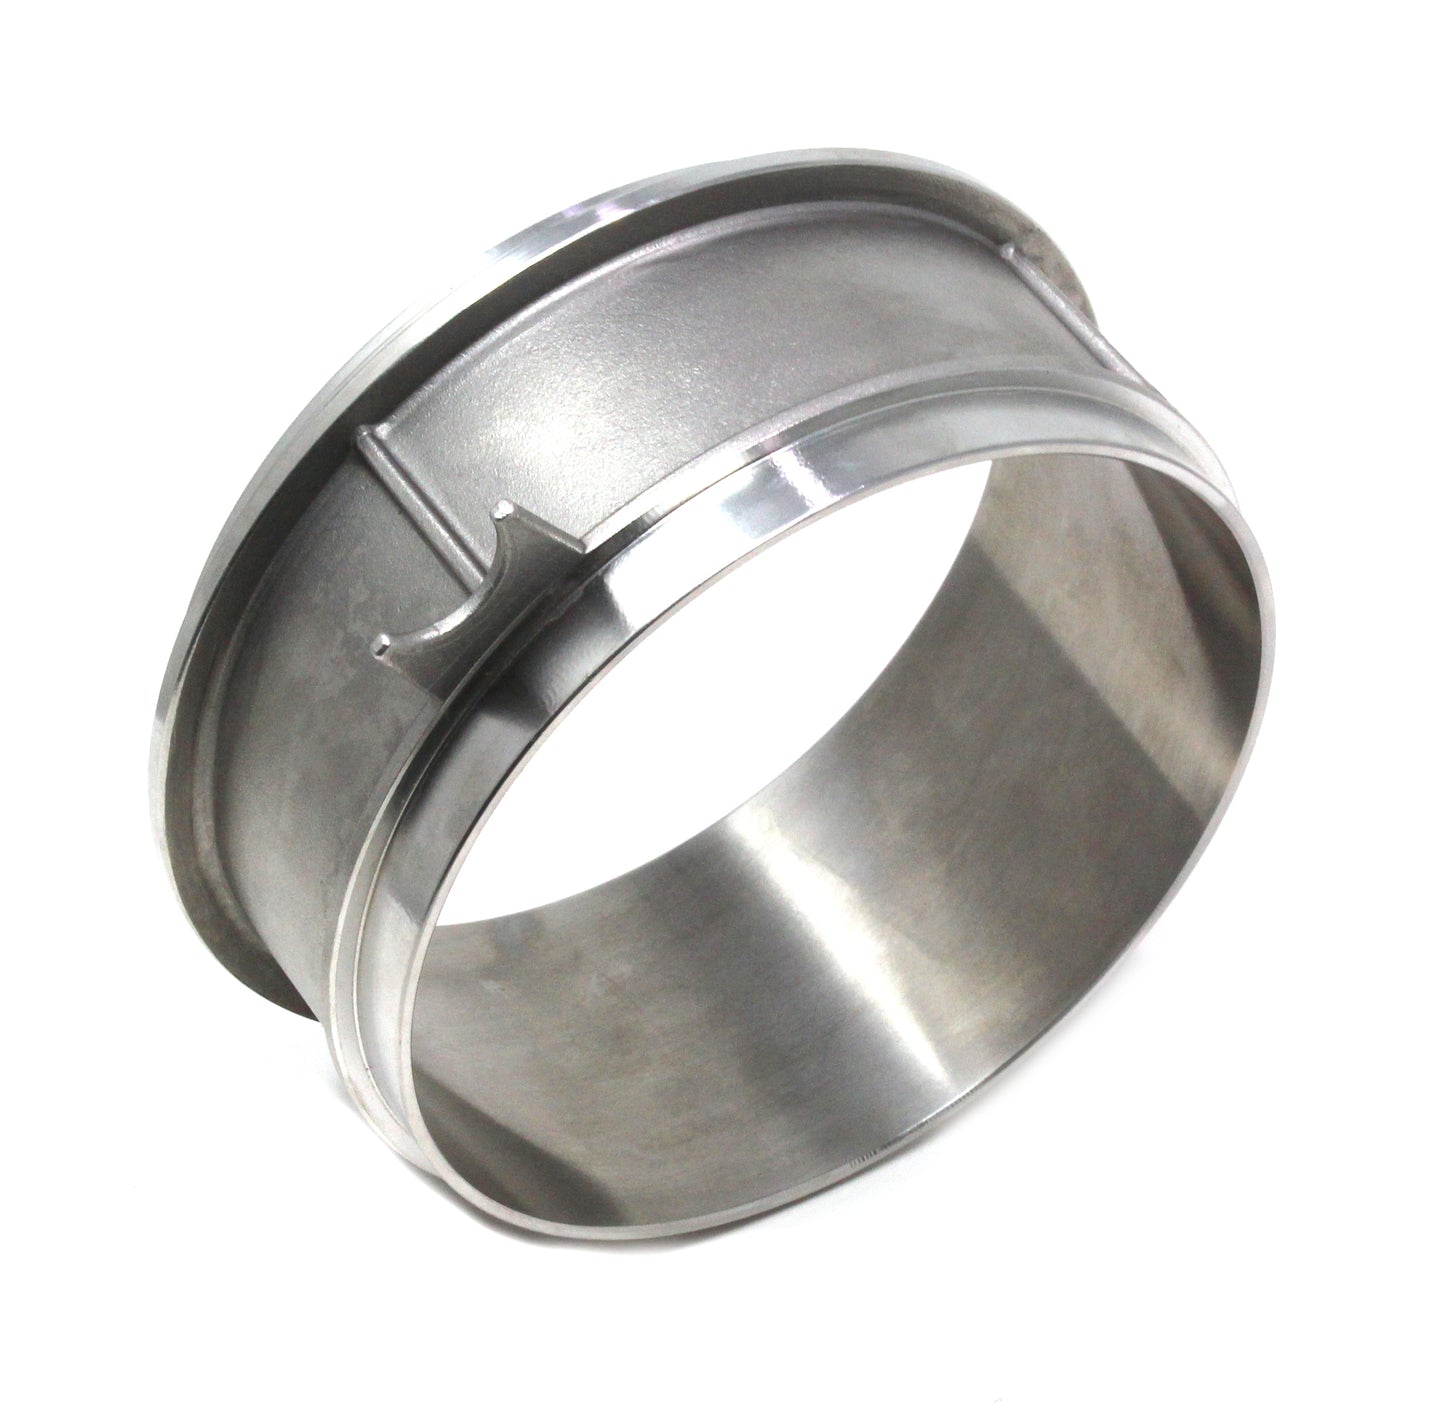 Sea Doo Stainless Spark Wear Ring 2-UP 3-UP 900 HO Ace All Models 267000617 267000813